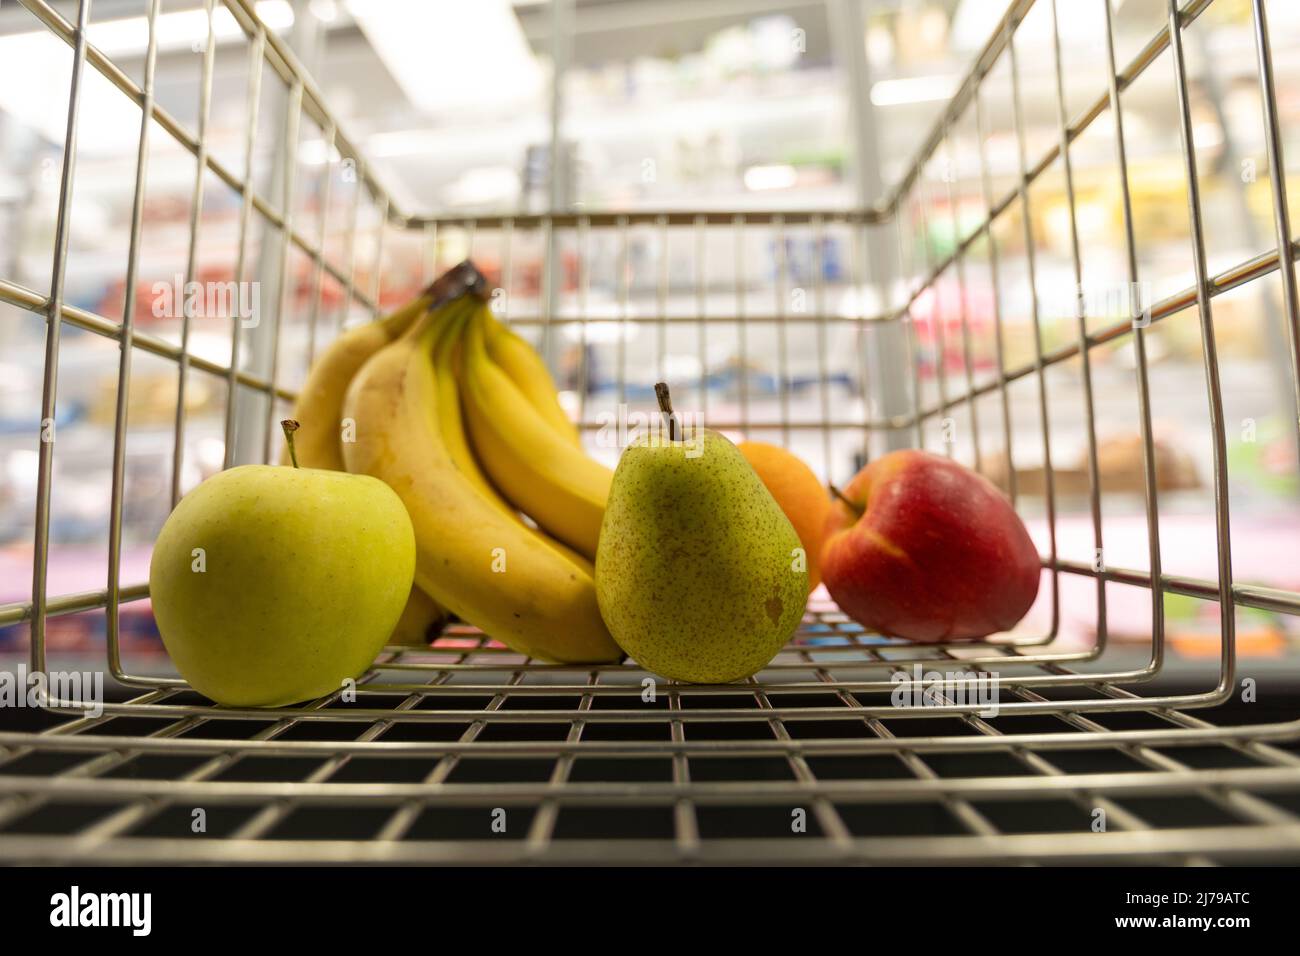 Fruits inside in trolley in supermarket, Inflation and economic recession concept. Stock Photo